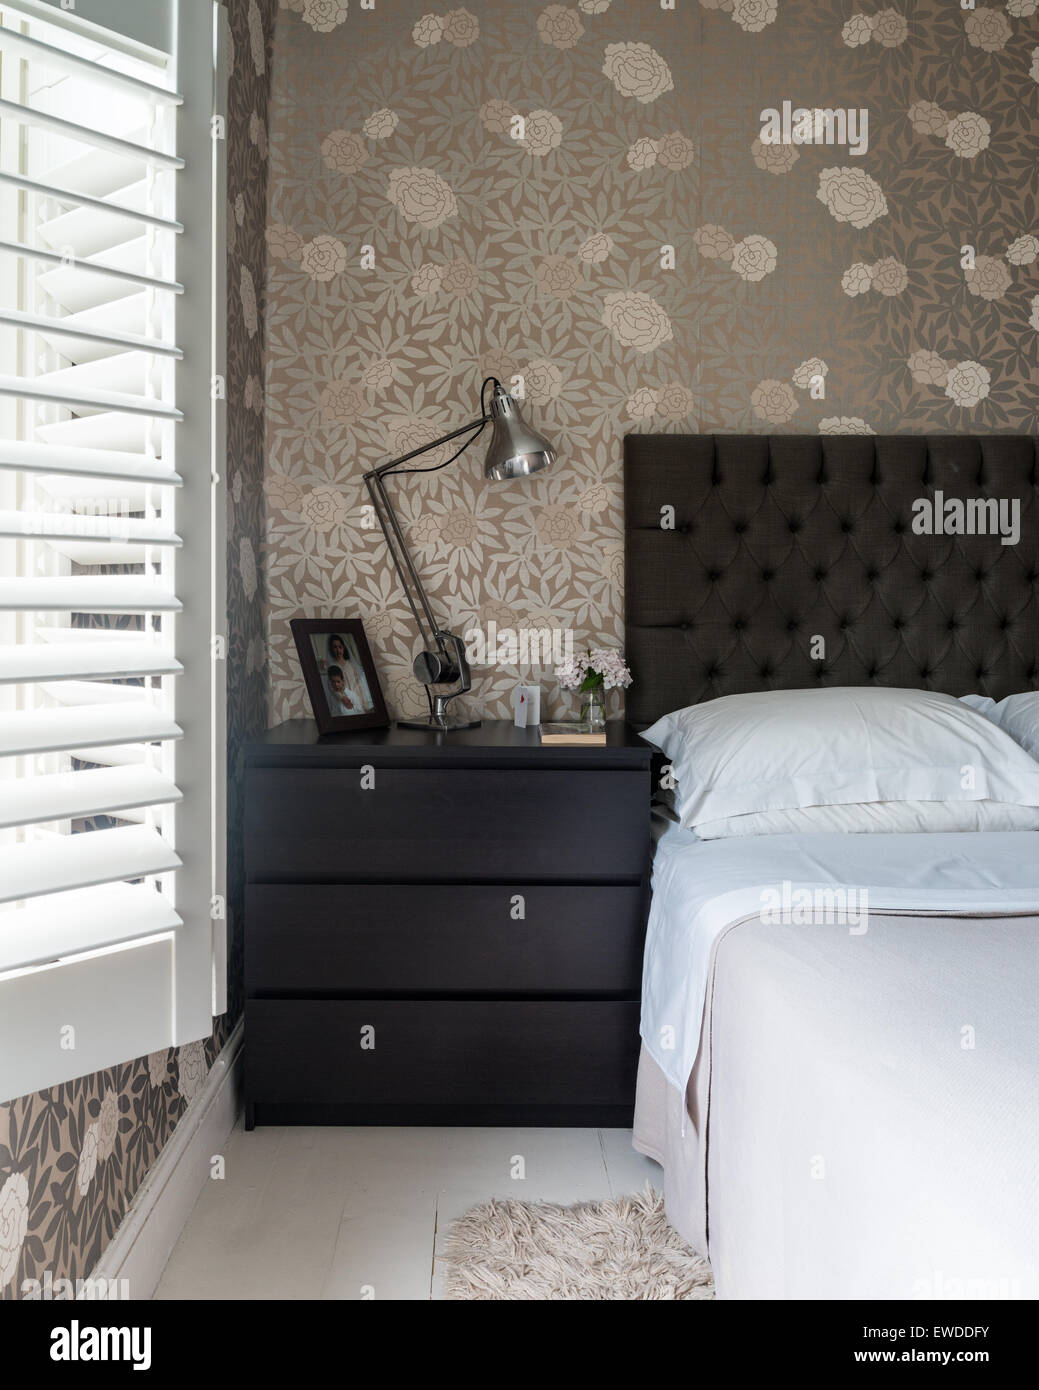 Osbourne & Little mettalic floral print wallpaper in bedroom with plantation shutters and buttoned headboard Stock Photo